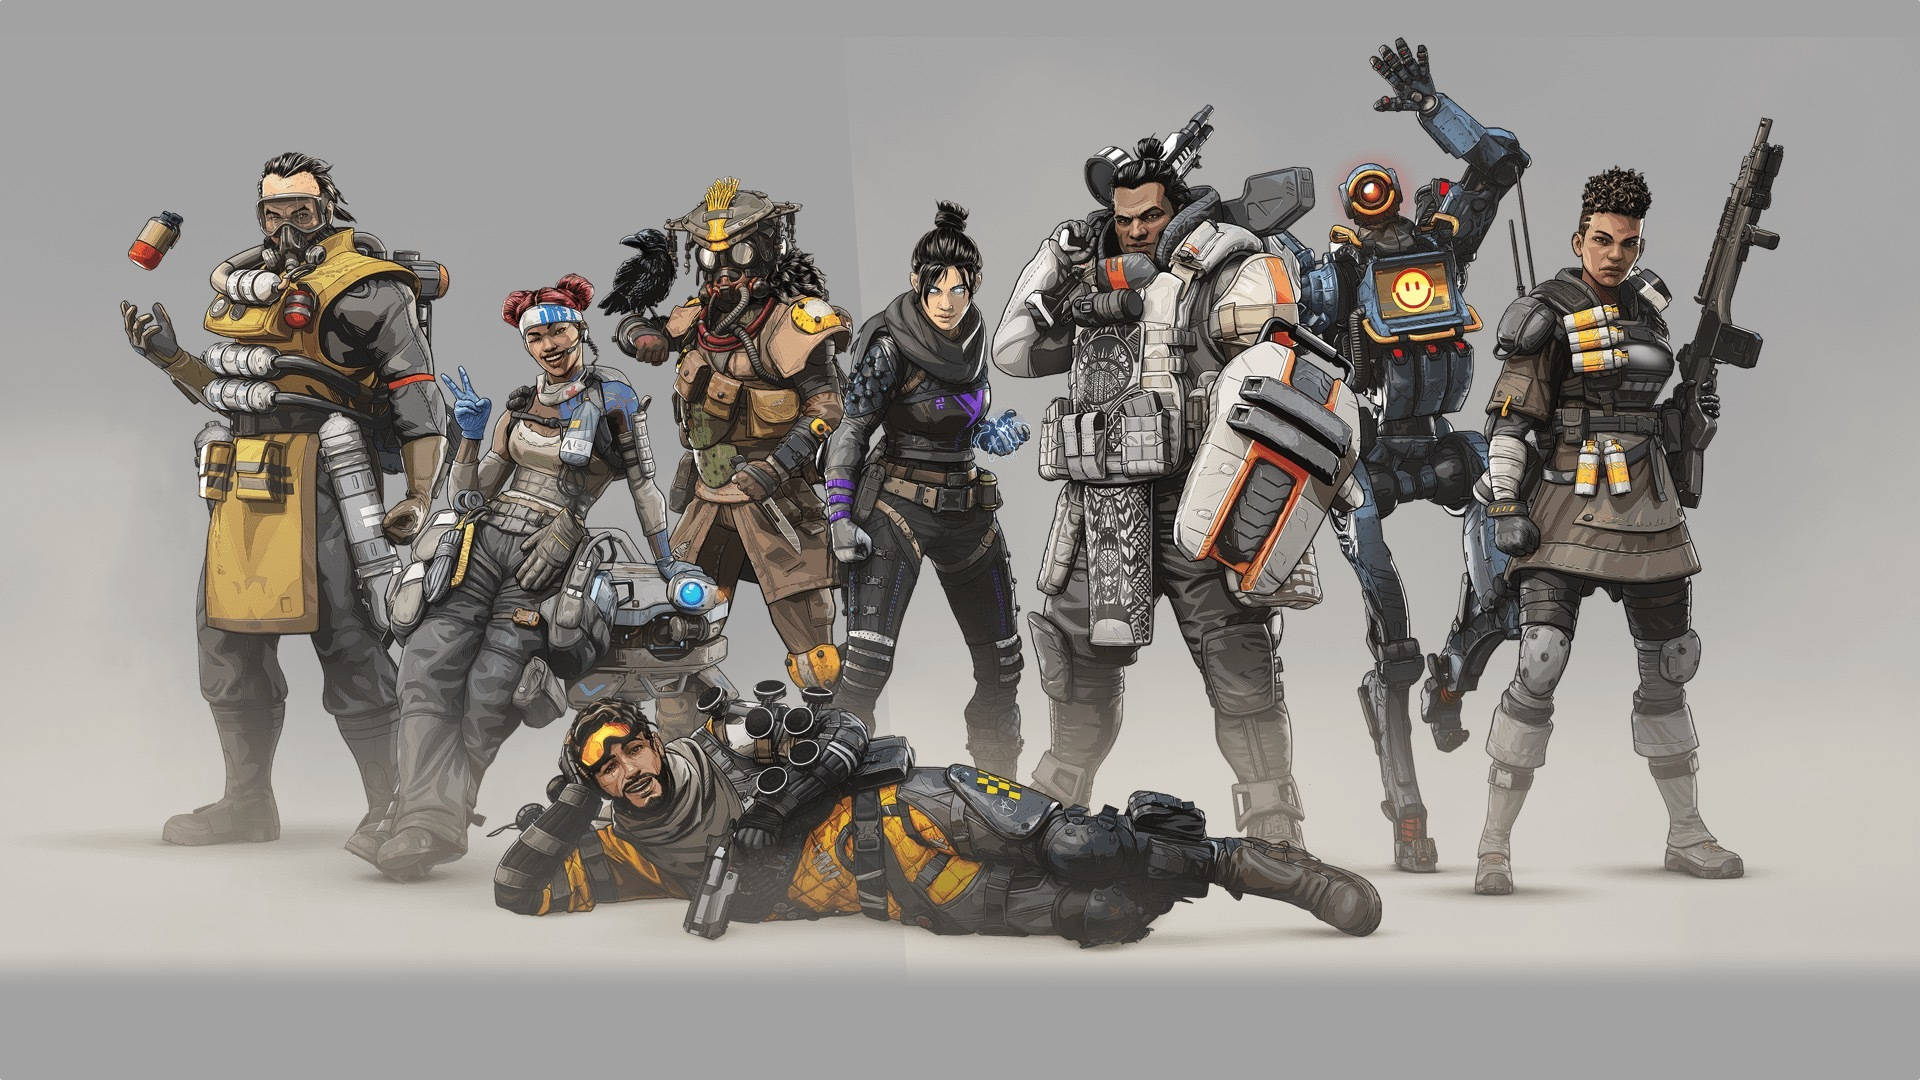 1920X1080 Apex Legends Wallpaper and Background